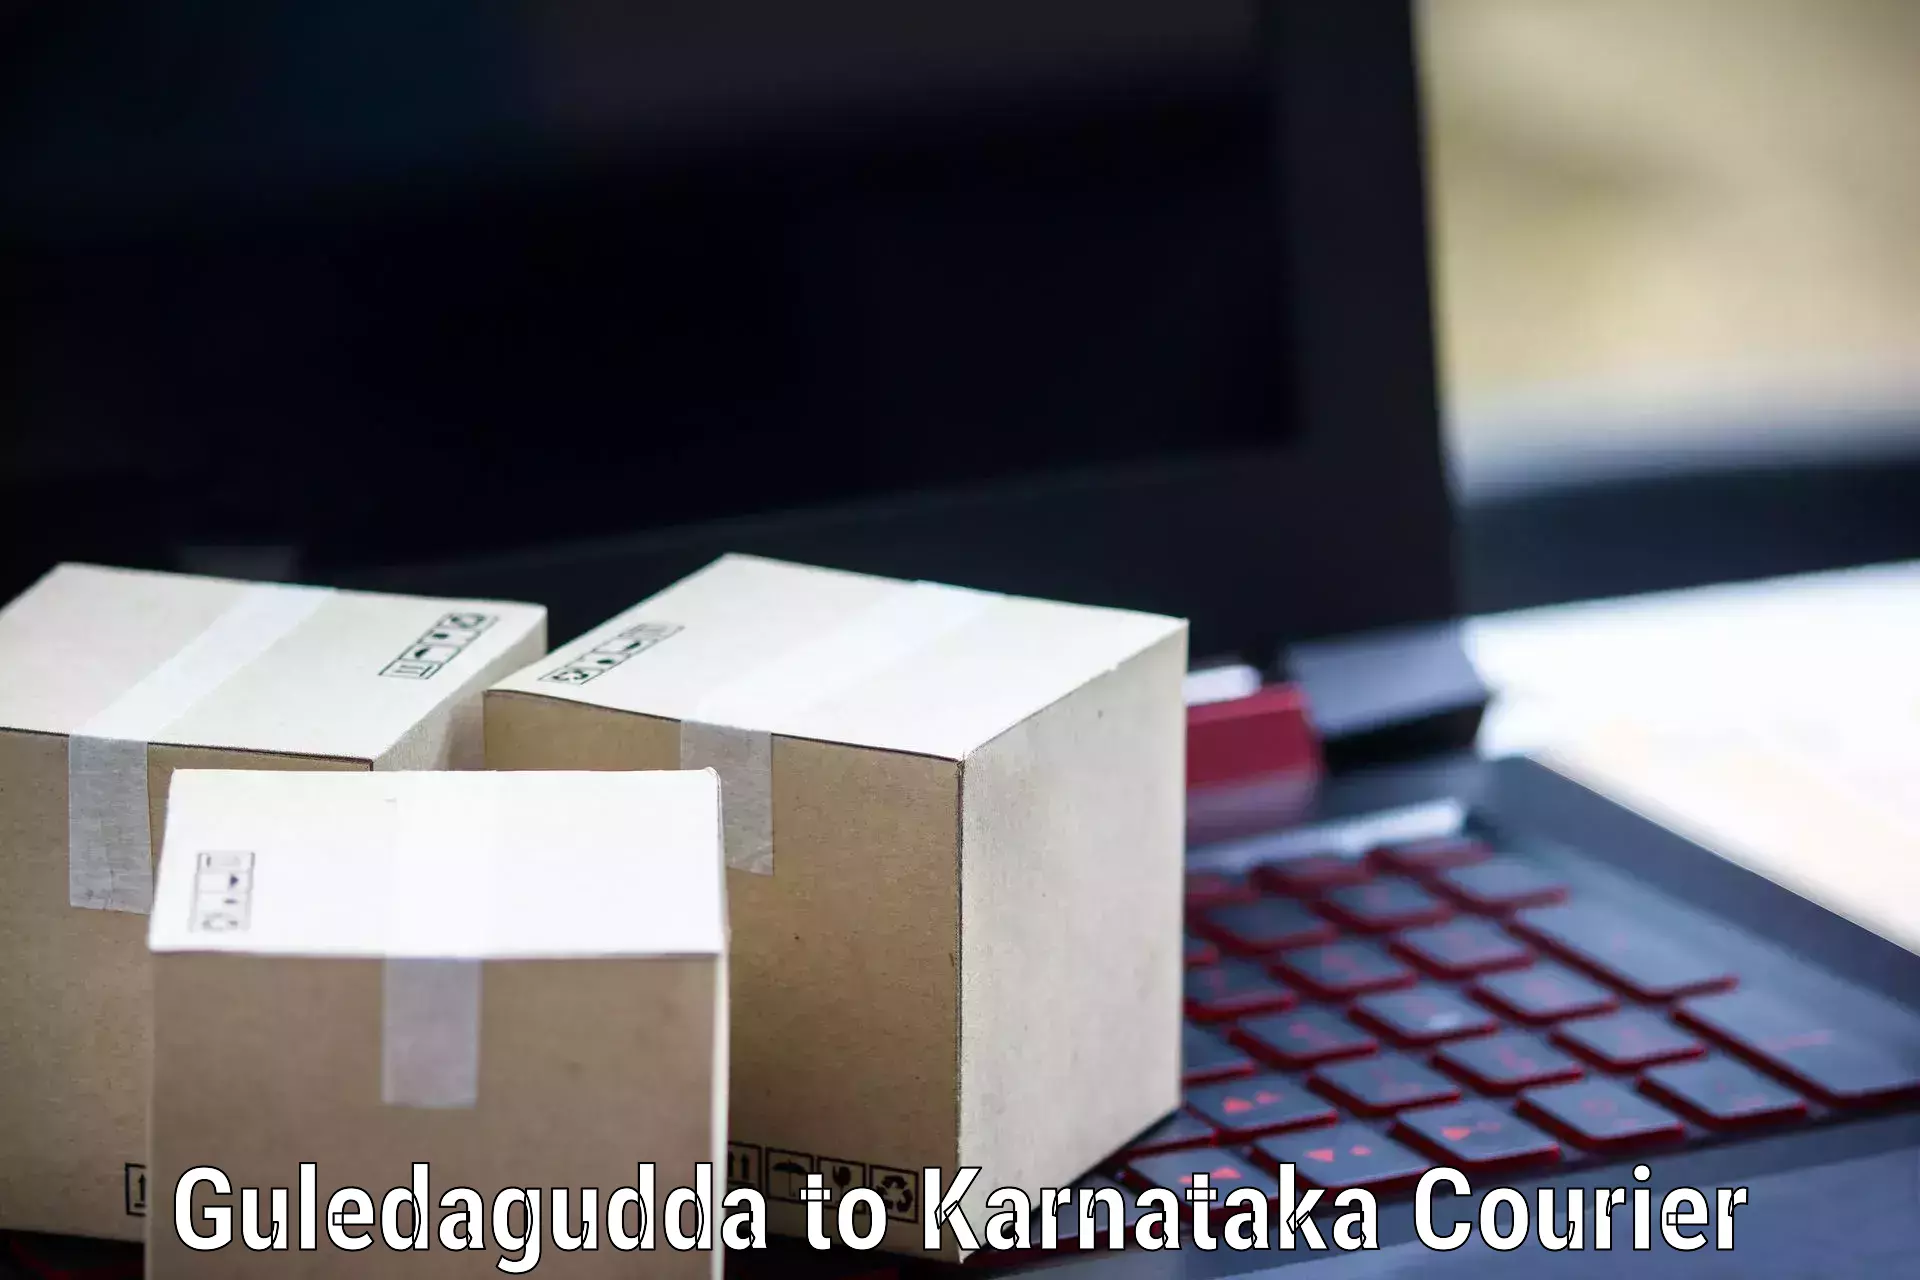 Reliable courier service Guledagudda to Chikkamagalur